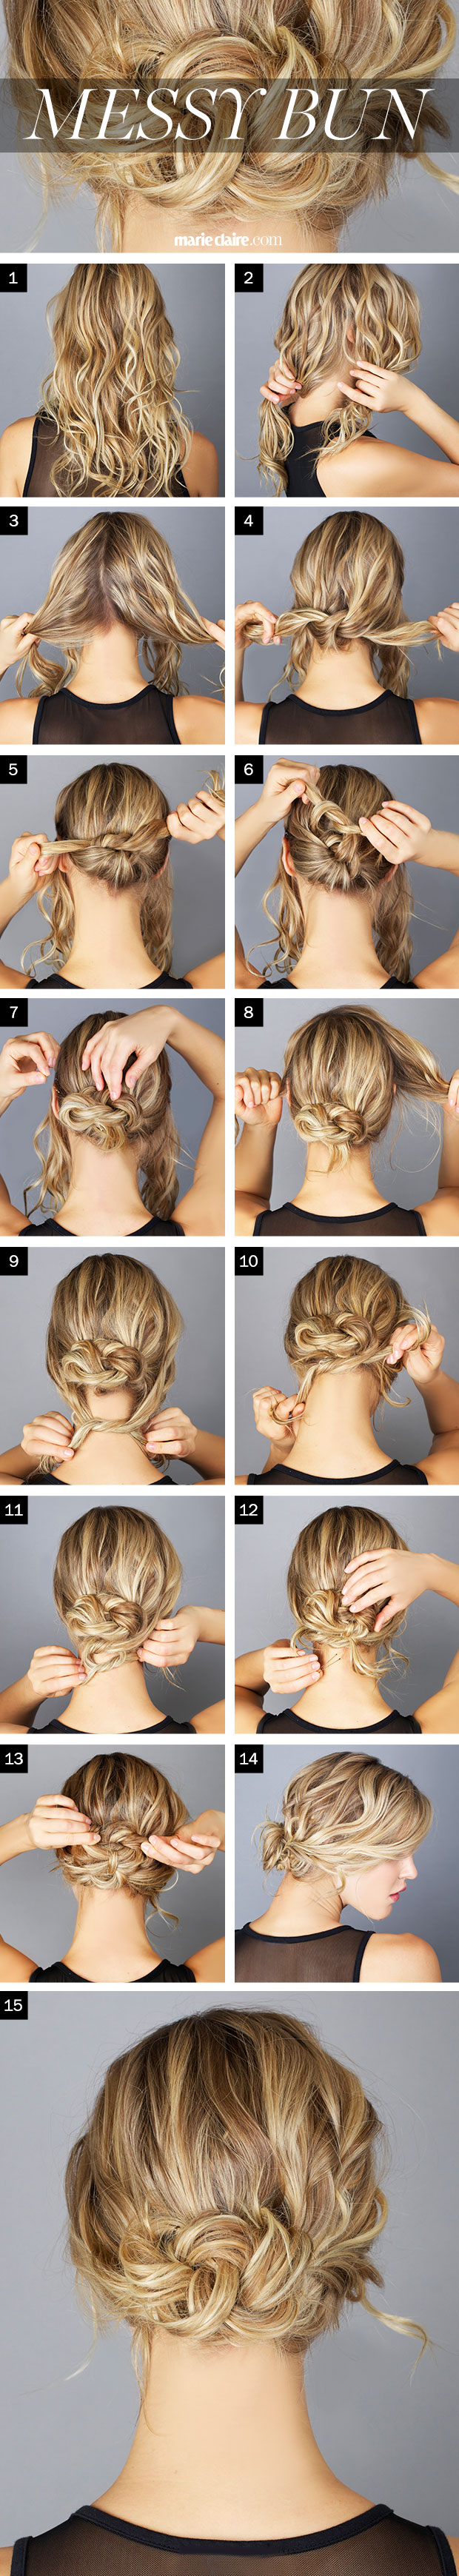 knotted-messy-bun